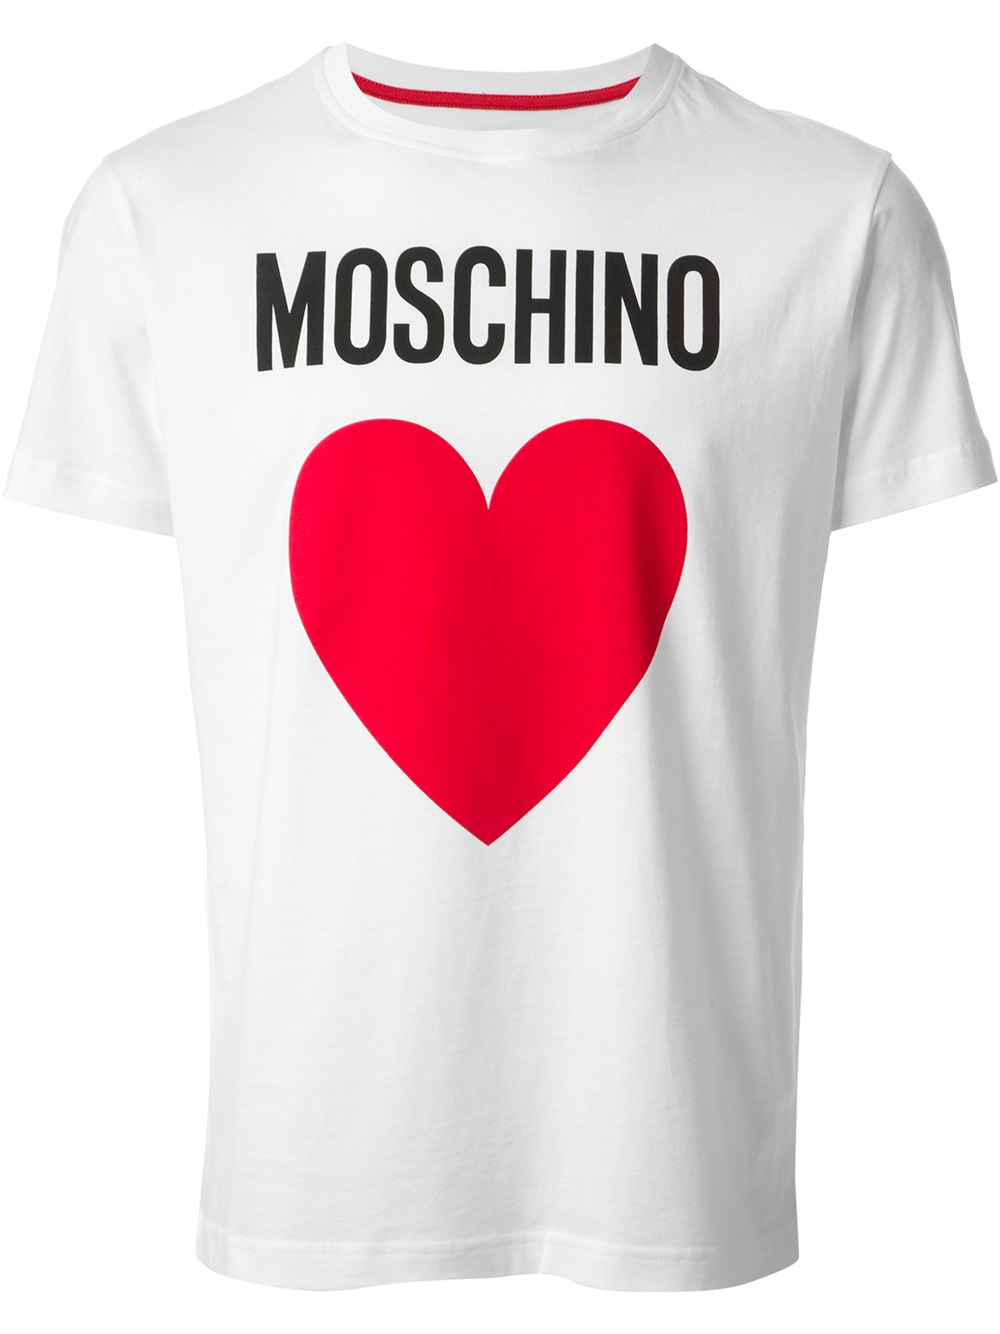 Moschino Heart Print Tshirt in White for Men - Lyst